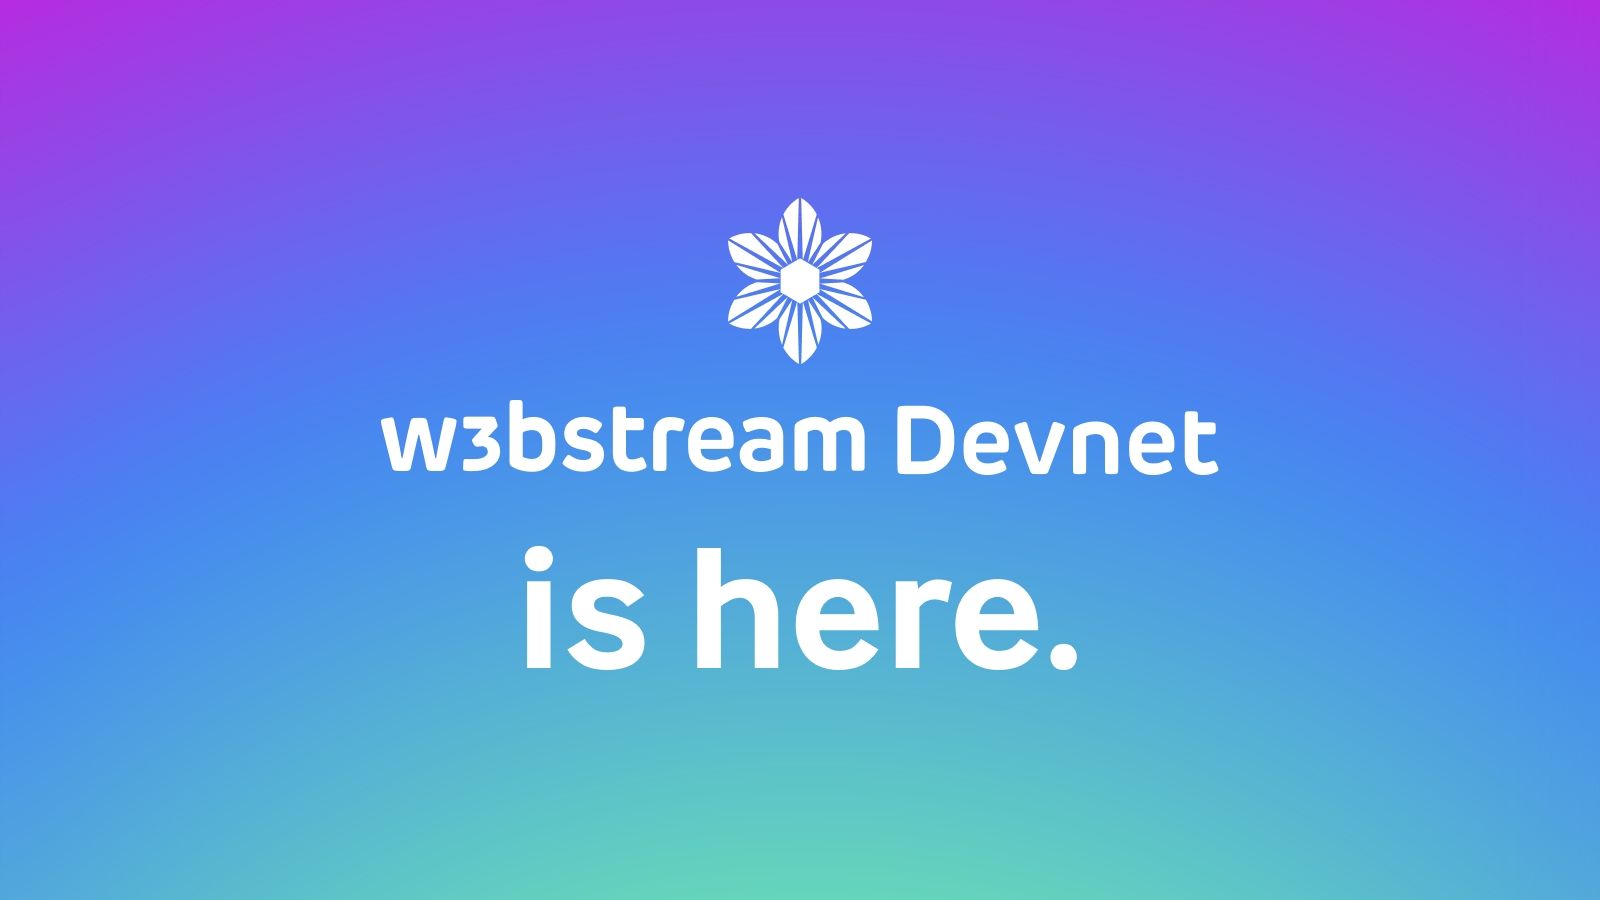 W3bstream’s Devnet Makes DePIN Building Faster